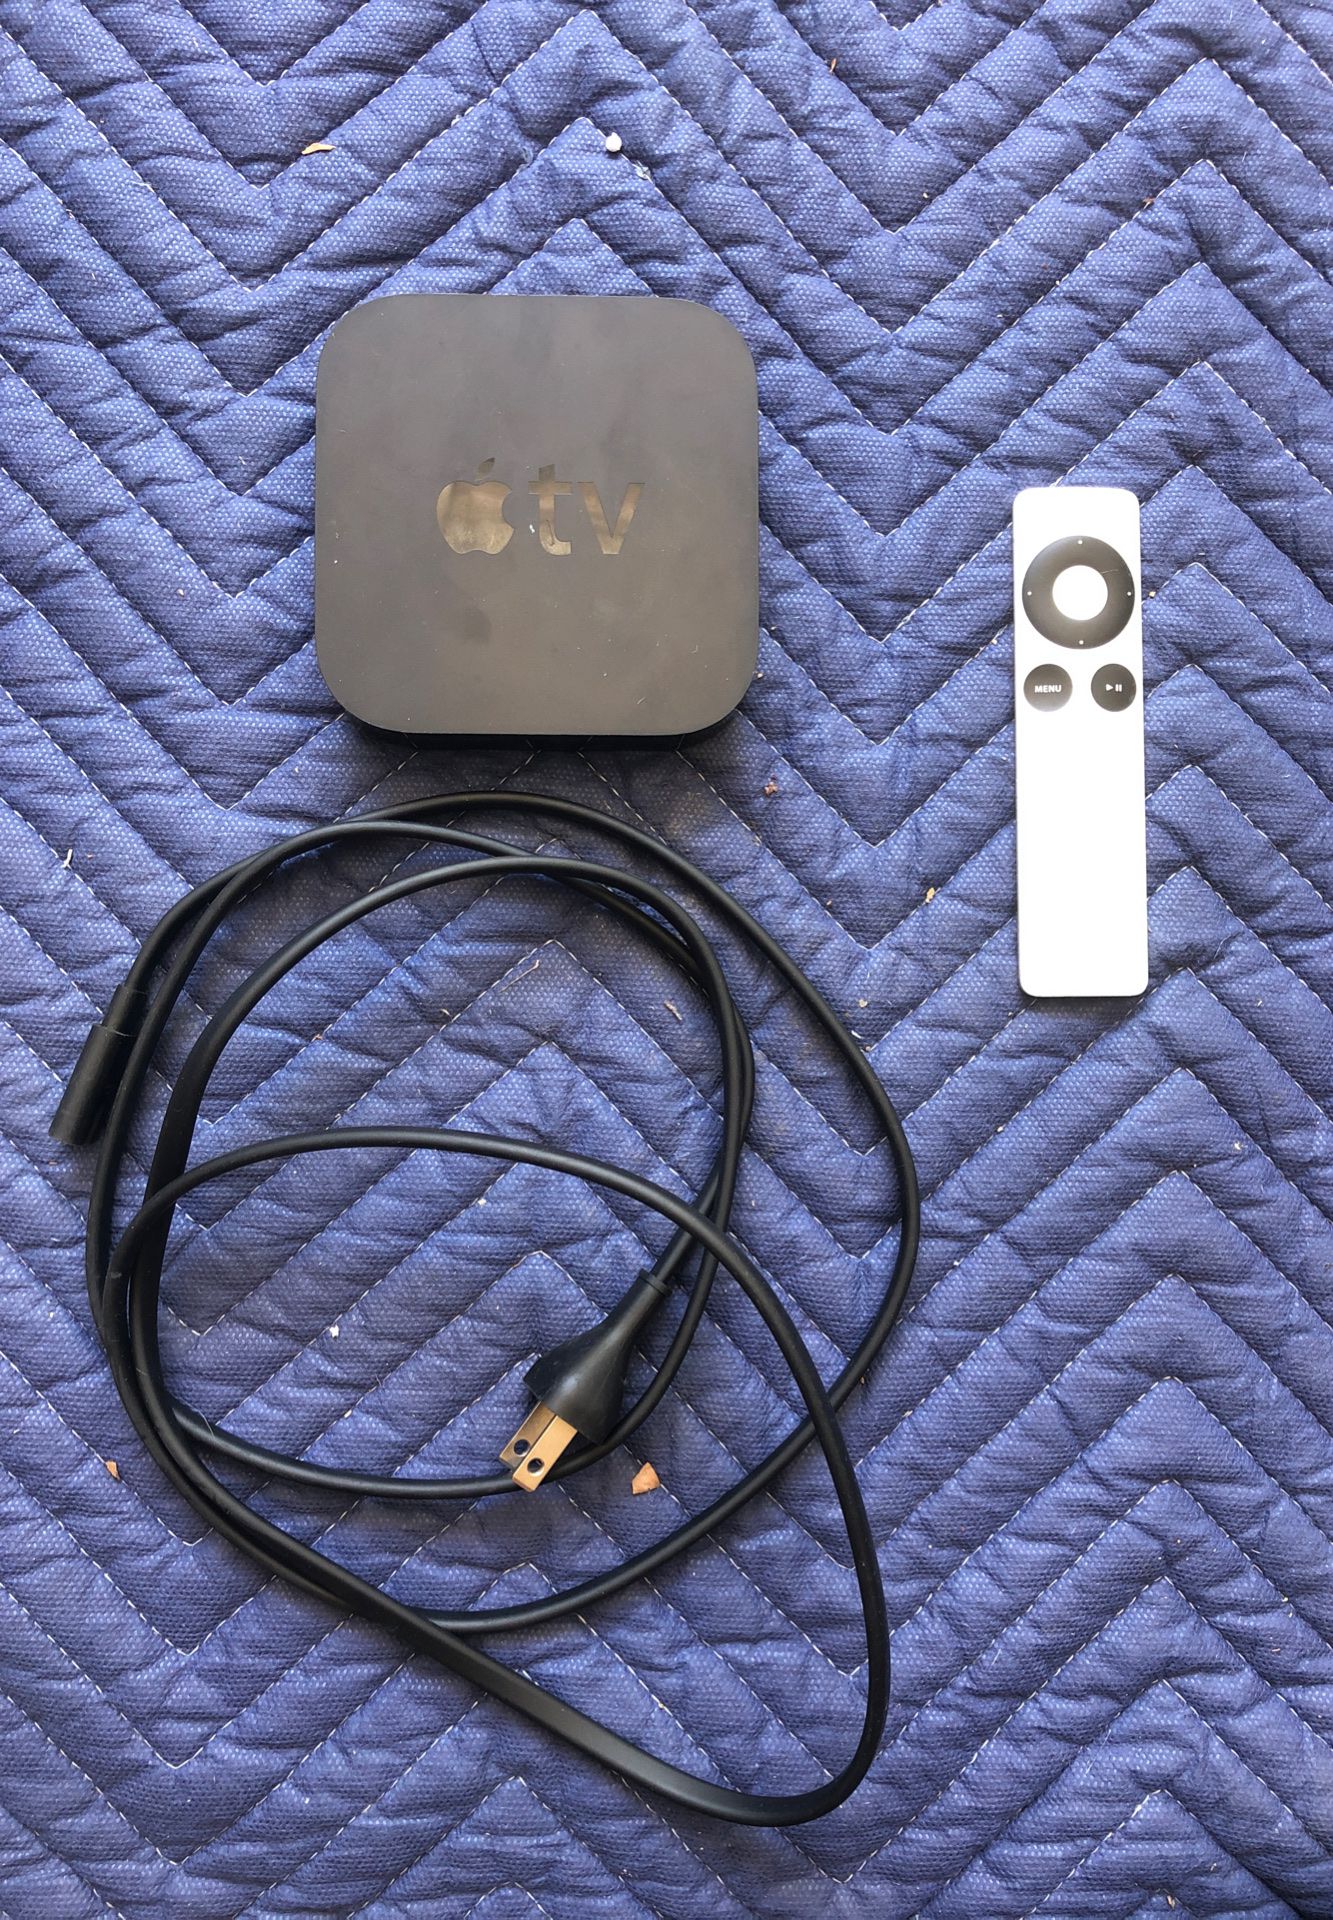 Apple TV (2nd gen) with power cable and remote